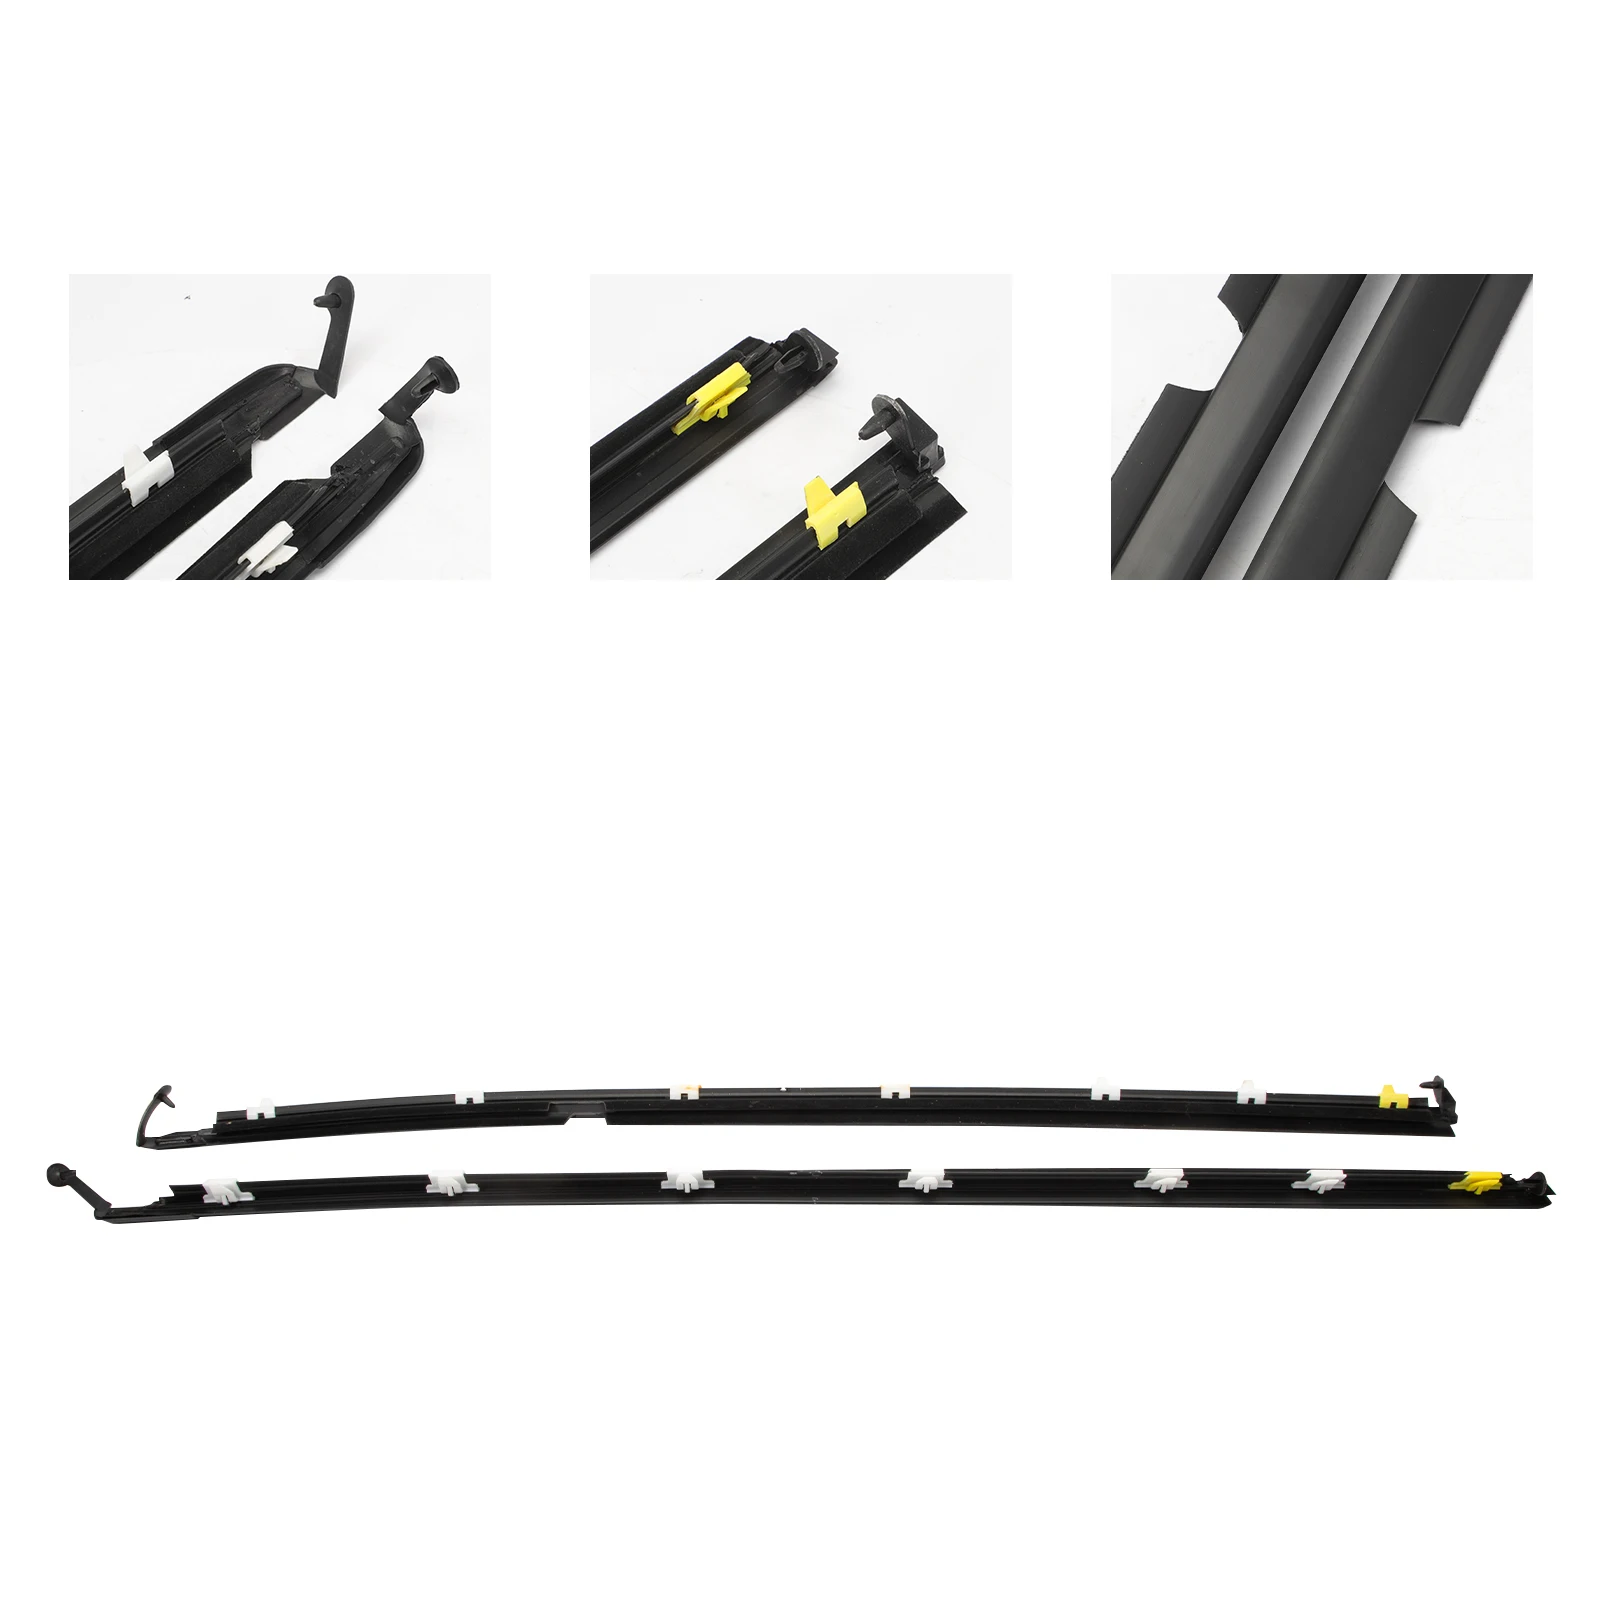 Weatherstrip Seal Left and Right Side Fit for Mazda Miata 1990-1997 1999-2005 Convertible OE NA01-58-810F,NA01-59-810F